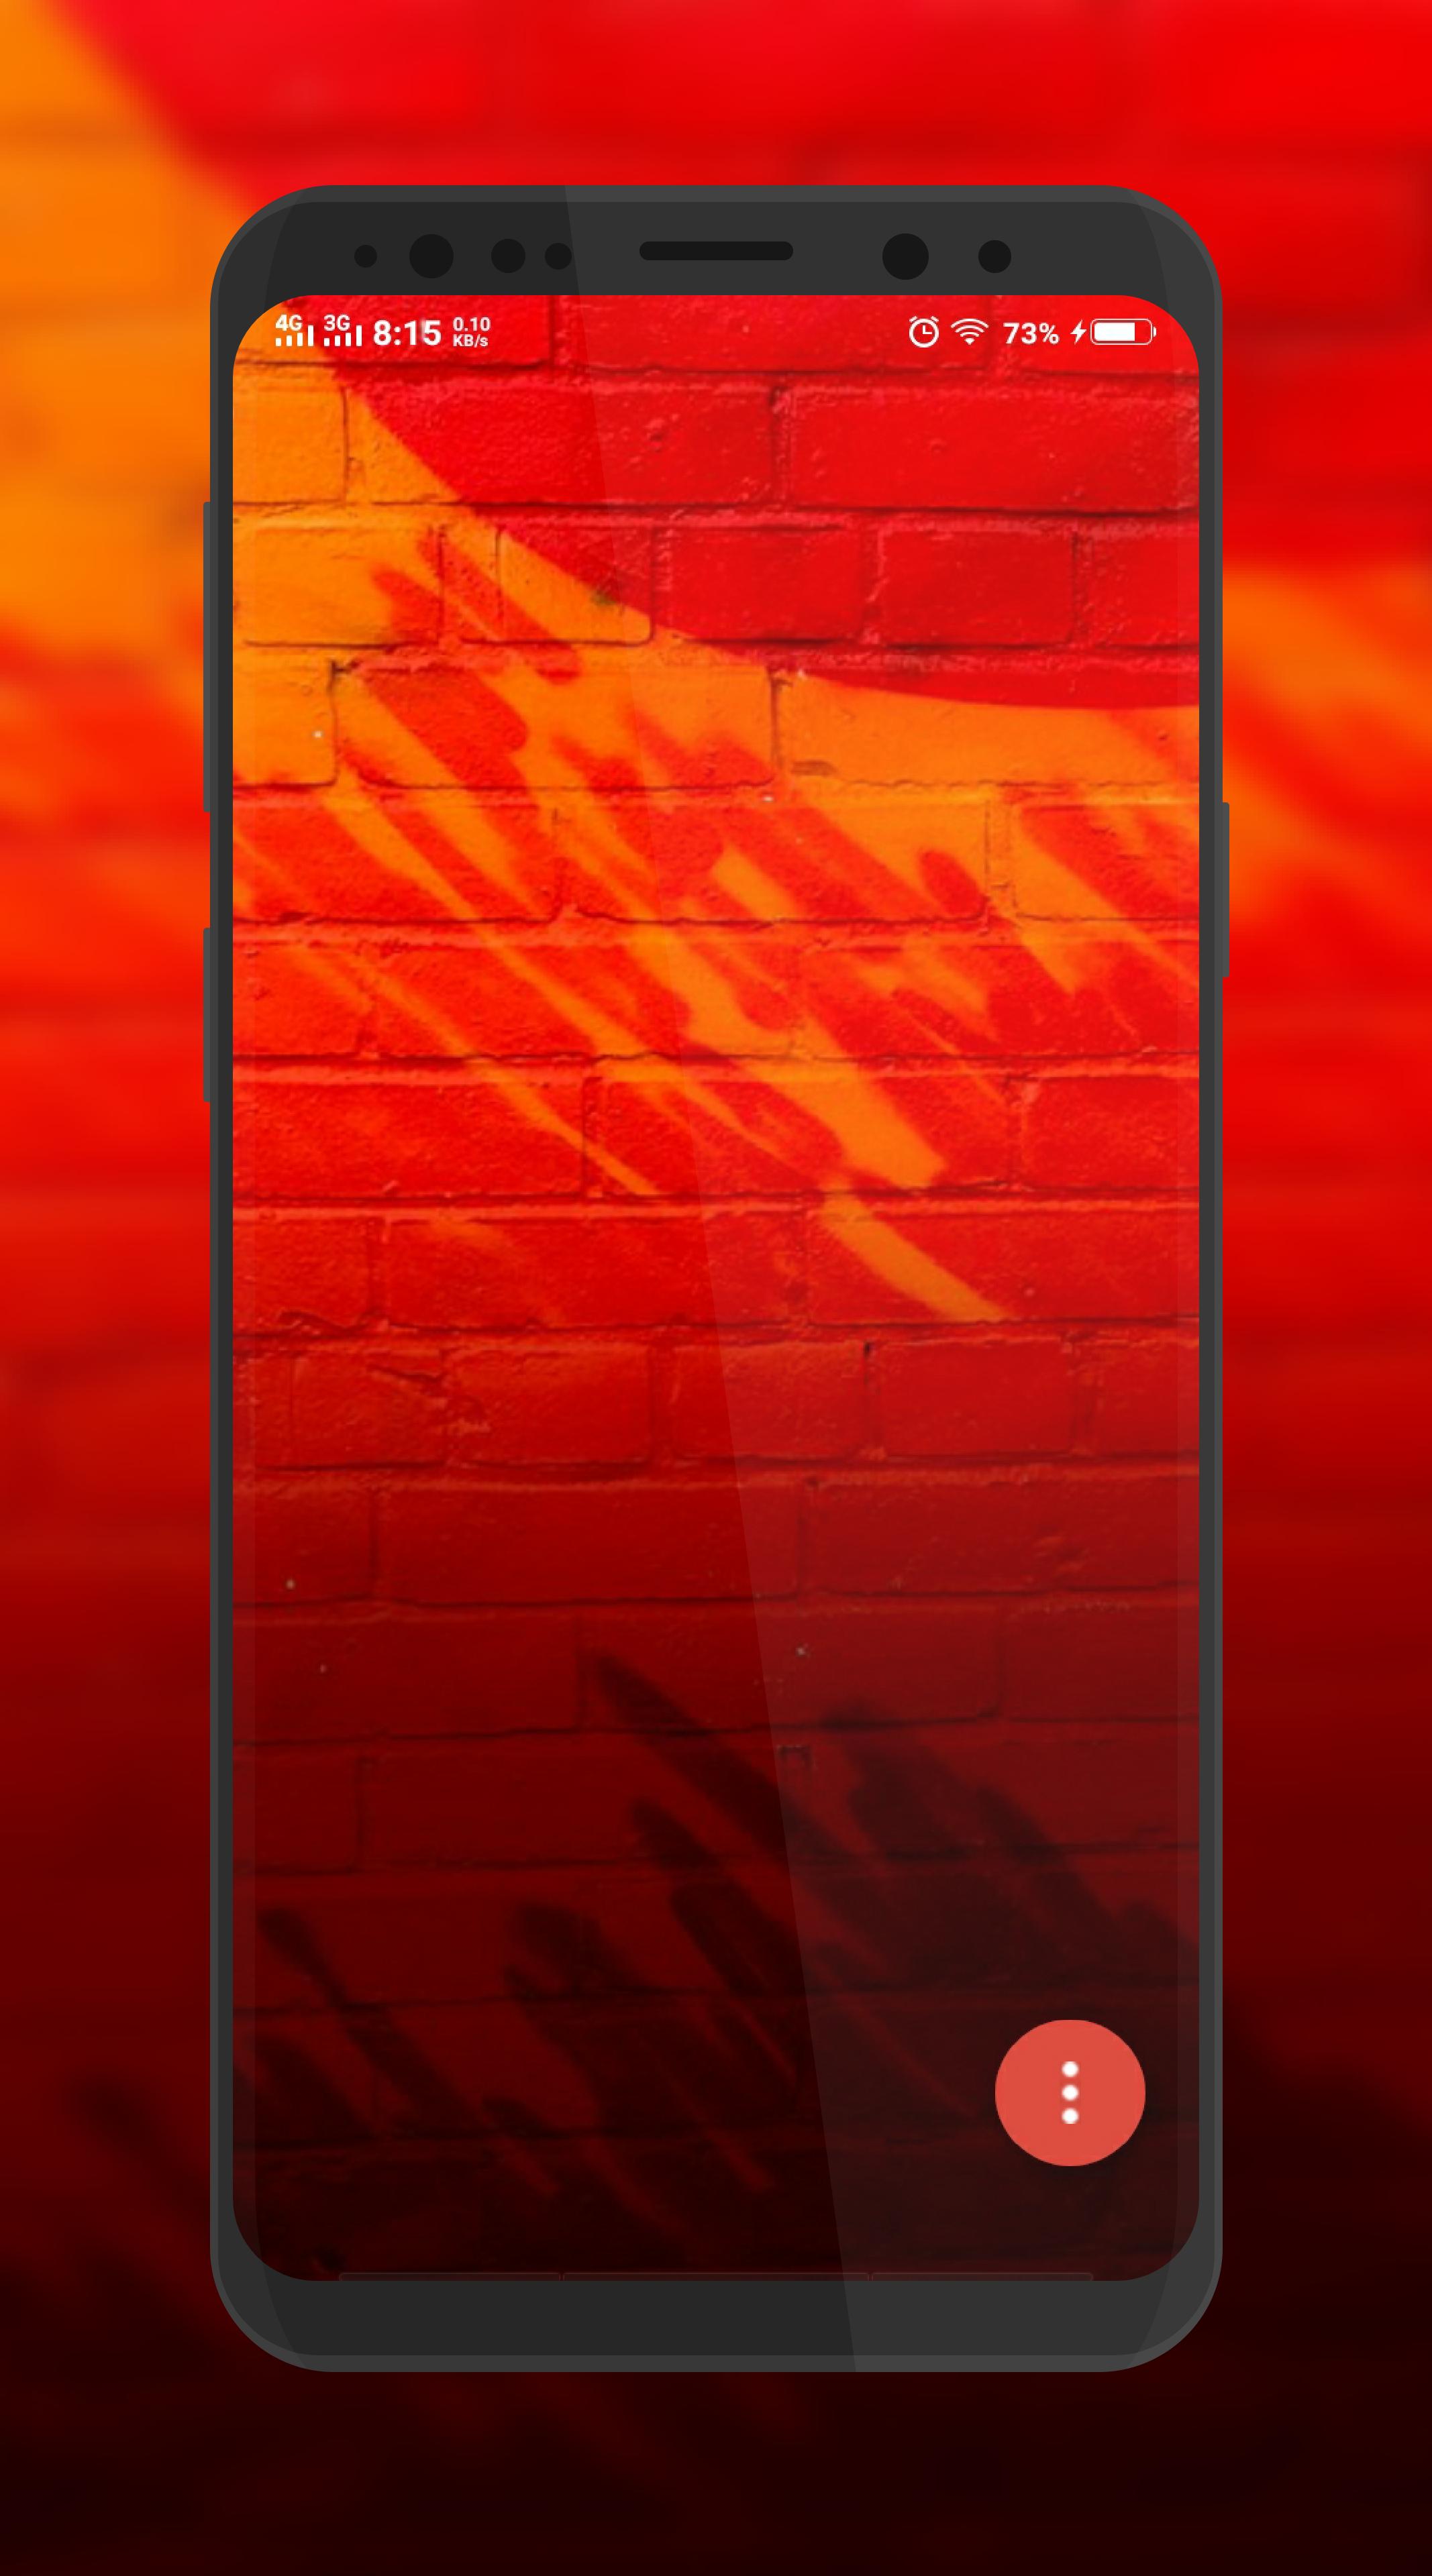 Wallpaper HD Pocophone F1 For Android APK Download